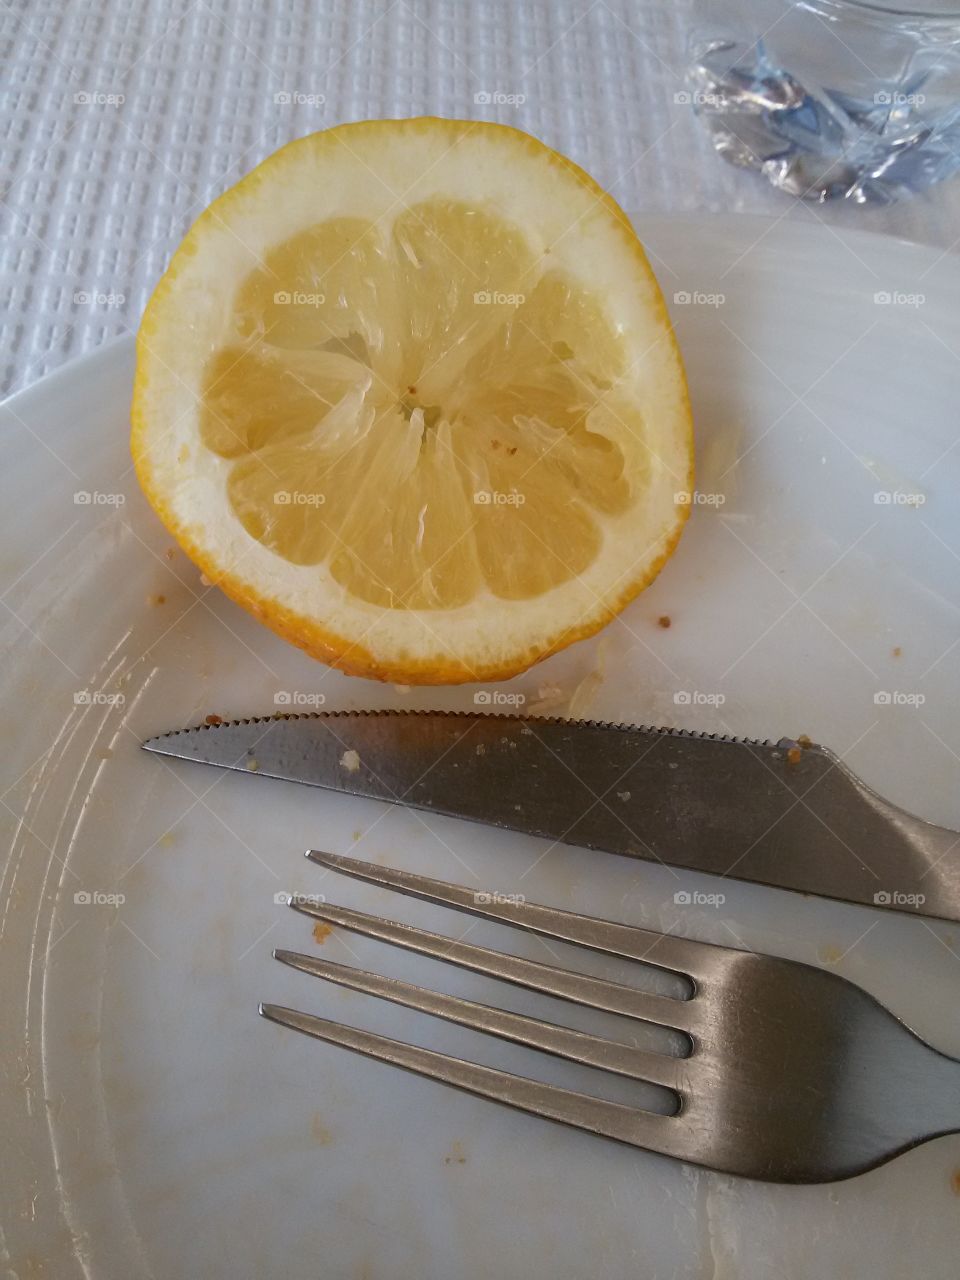 lemon in a plate after lunch